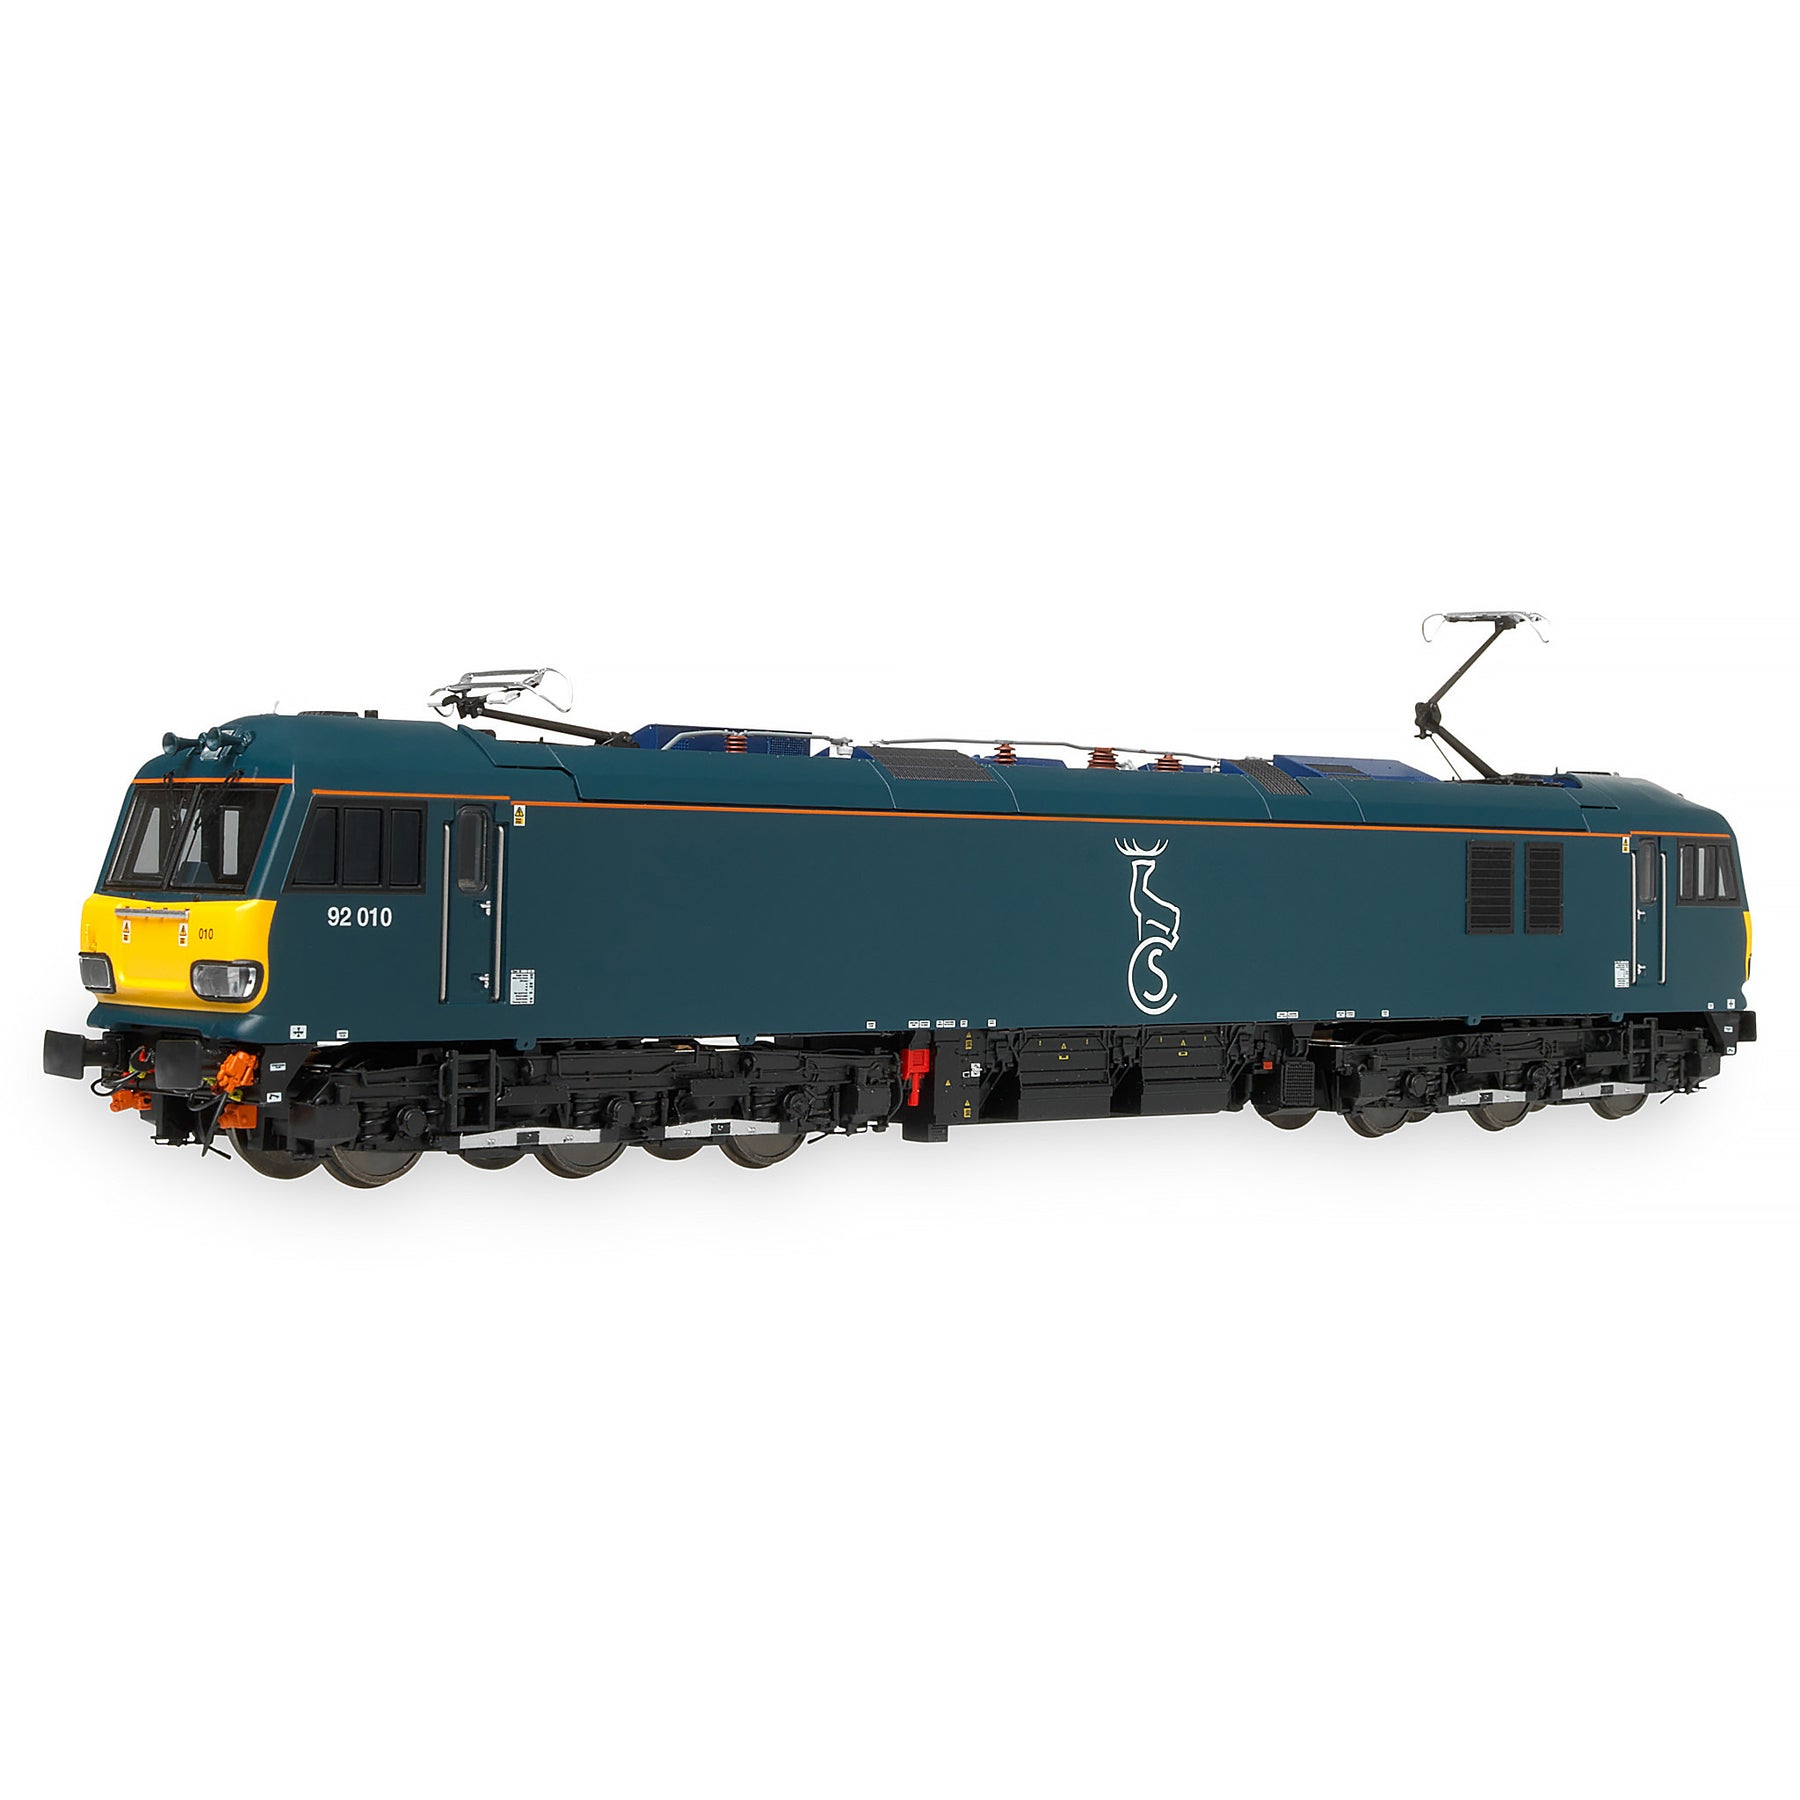 Remaining Class 92 and Mark 5 Delivery Update